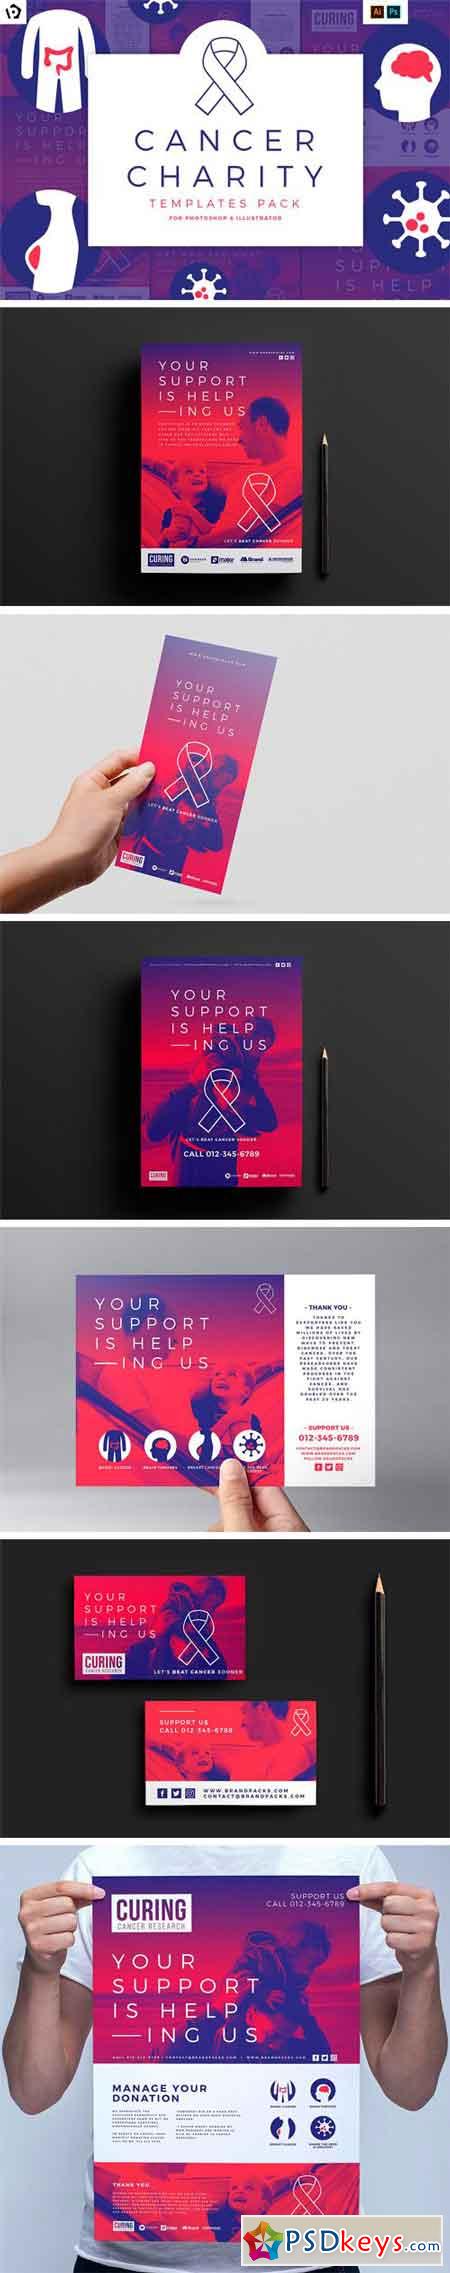 Cancer Charity Templates Pack 1880741